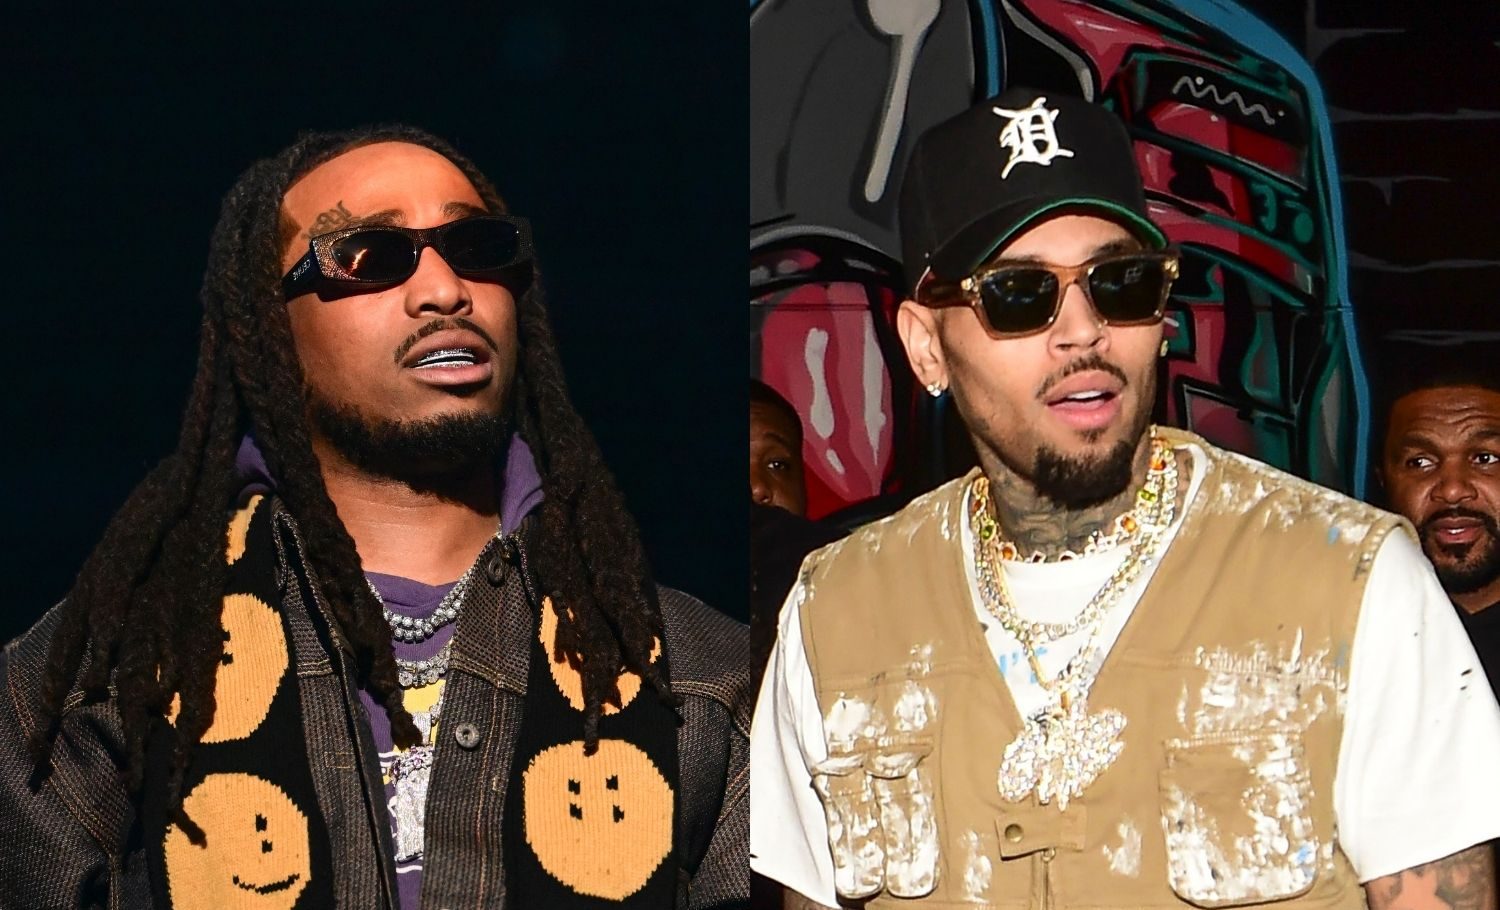 He’s Awake! Quavo Shares First Response To Chris Brown’s ‘Weakest Link’ Diss  thumbnail